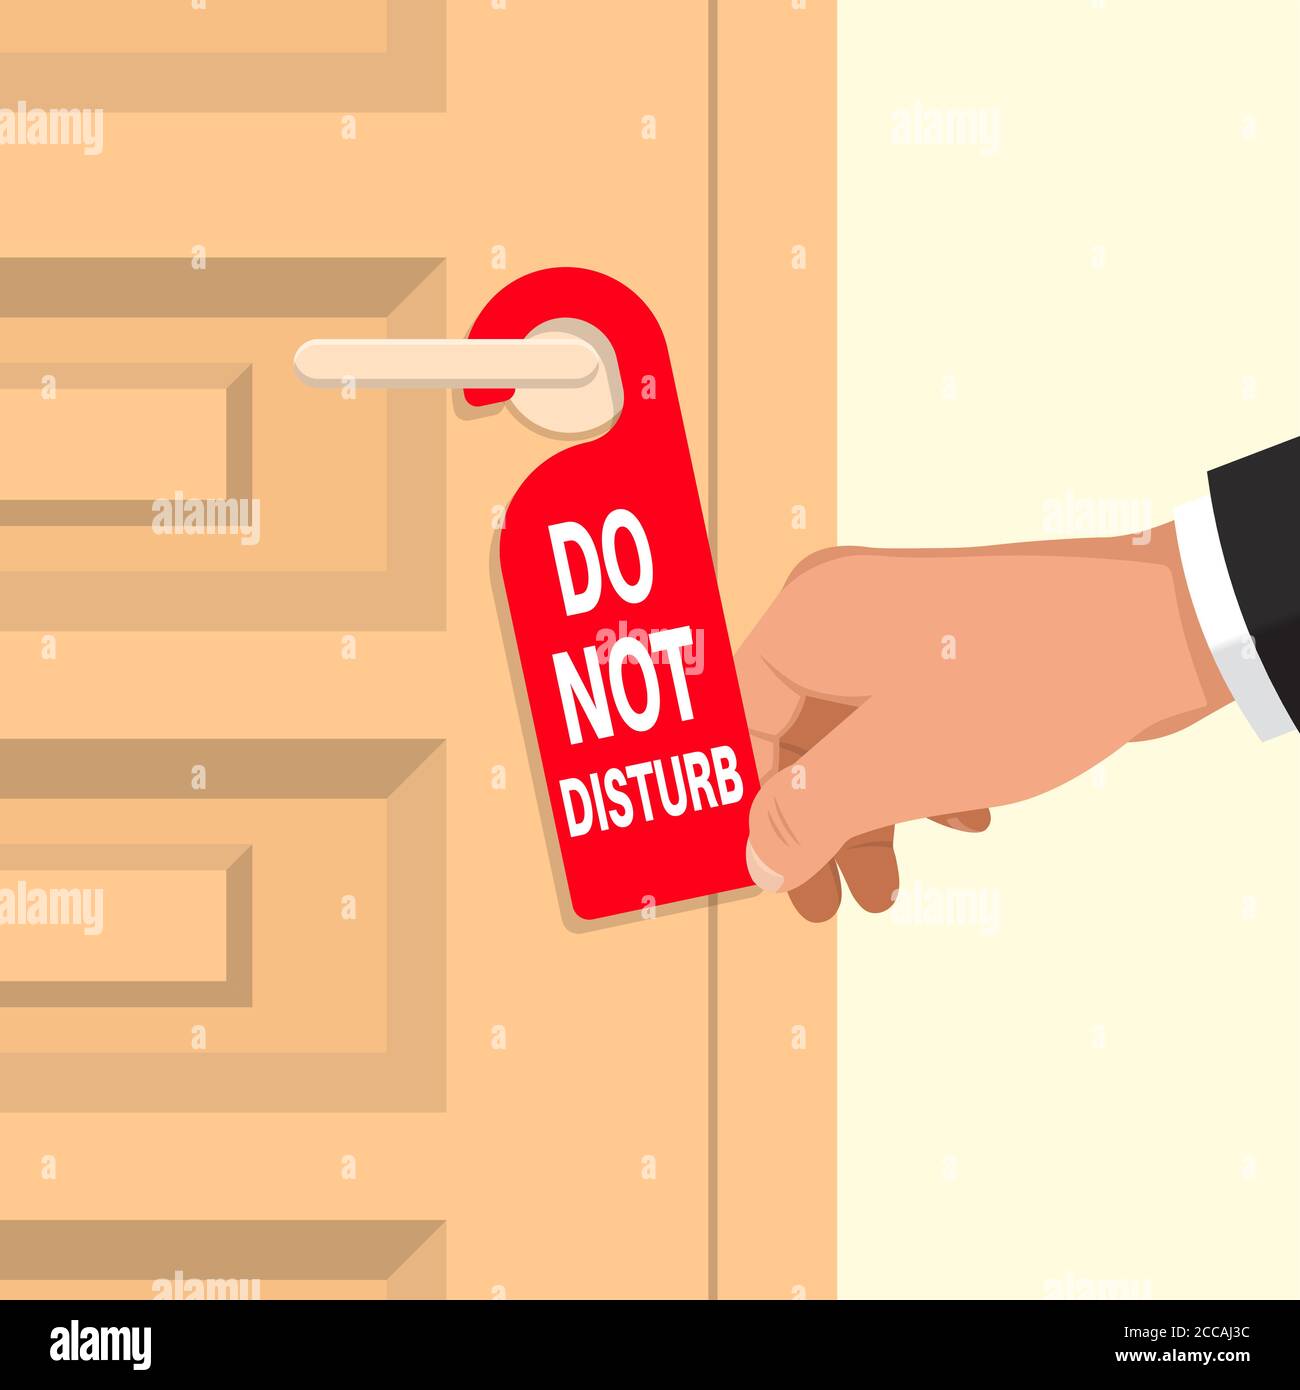 Do not disturb. The businessman 's hand hangs a warning sign on the door handle. Business concept. Vector illustration in a flat style. Stock Vector